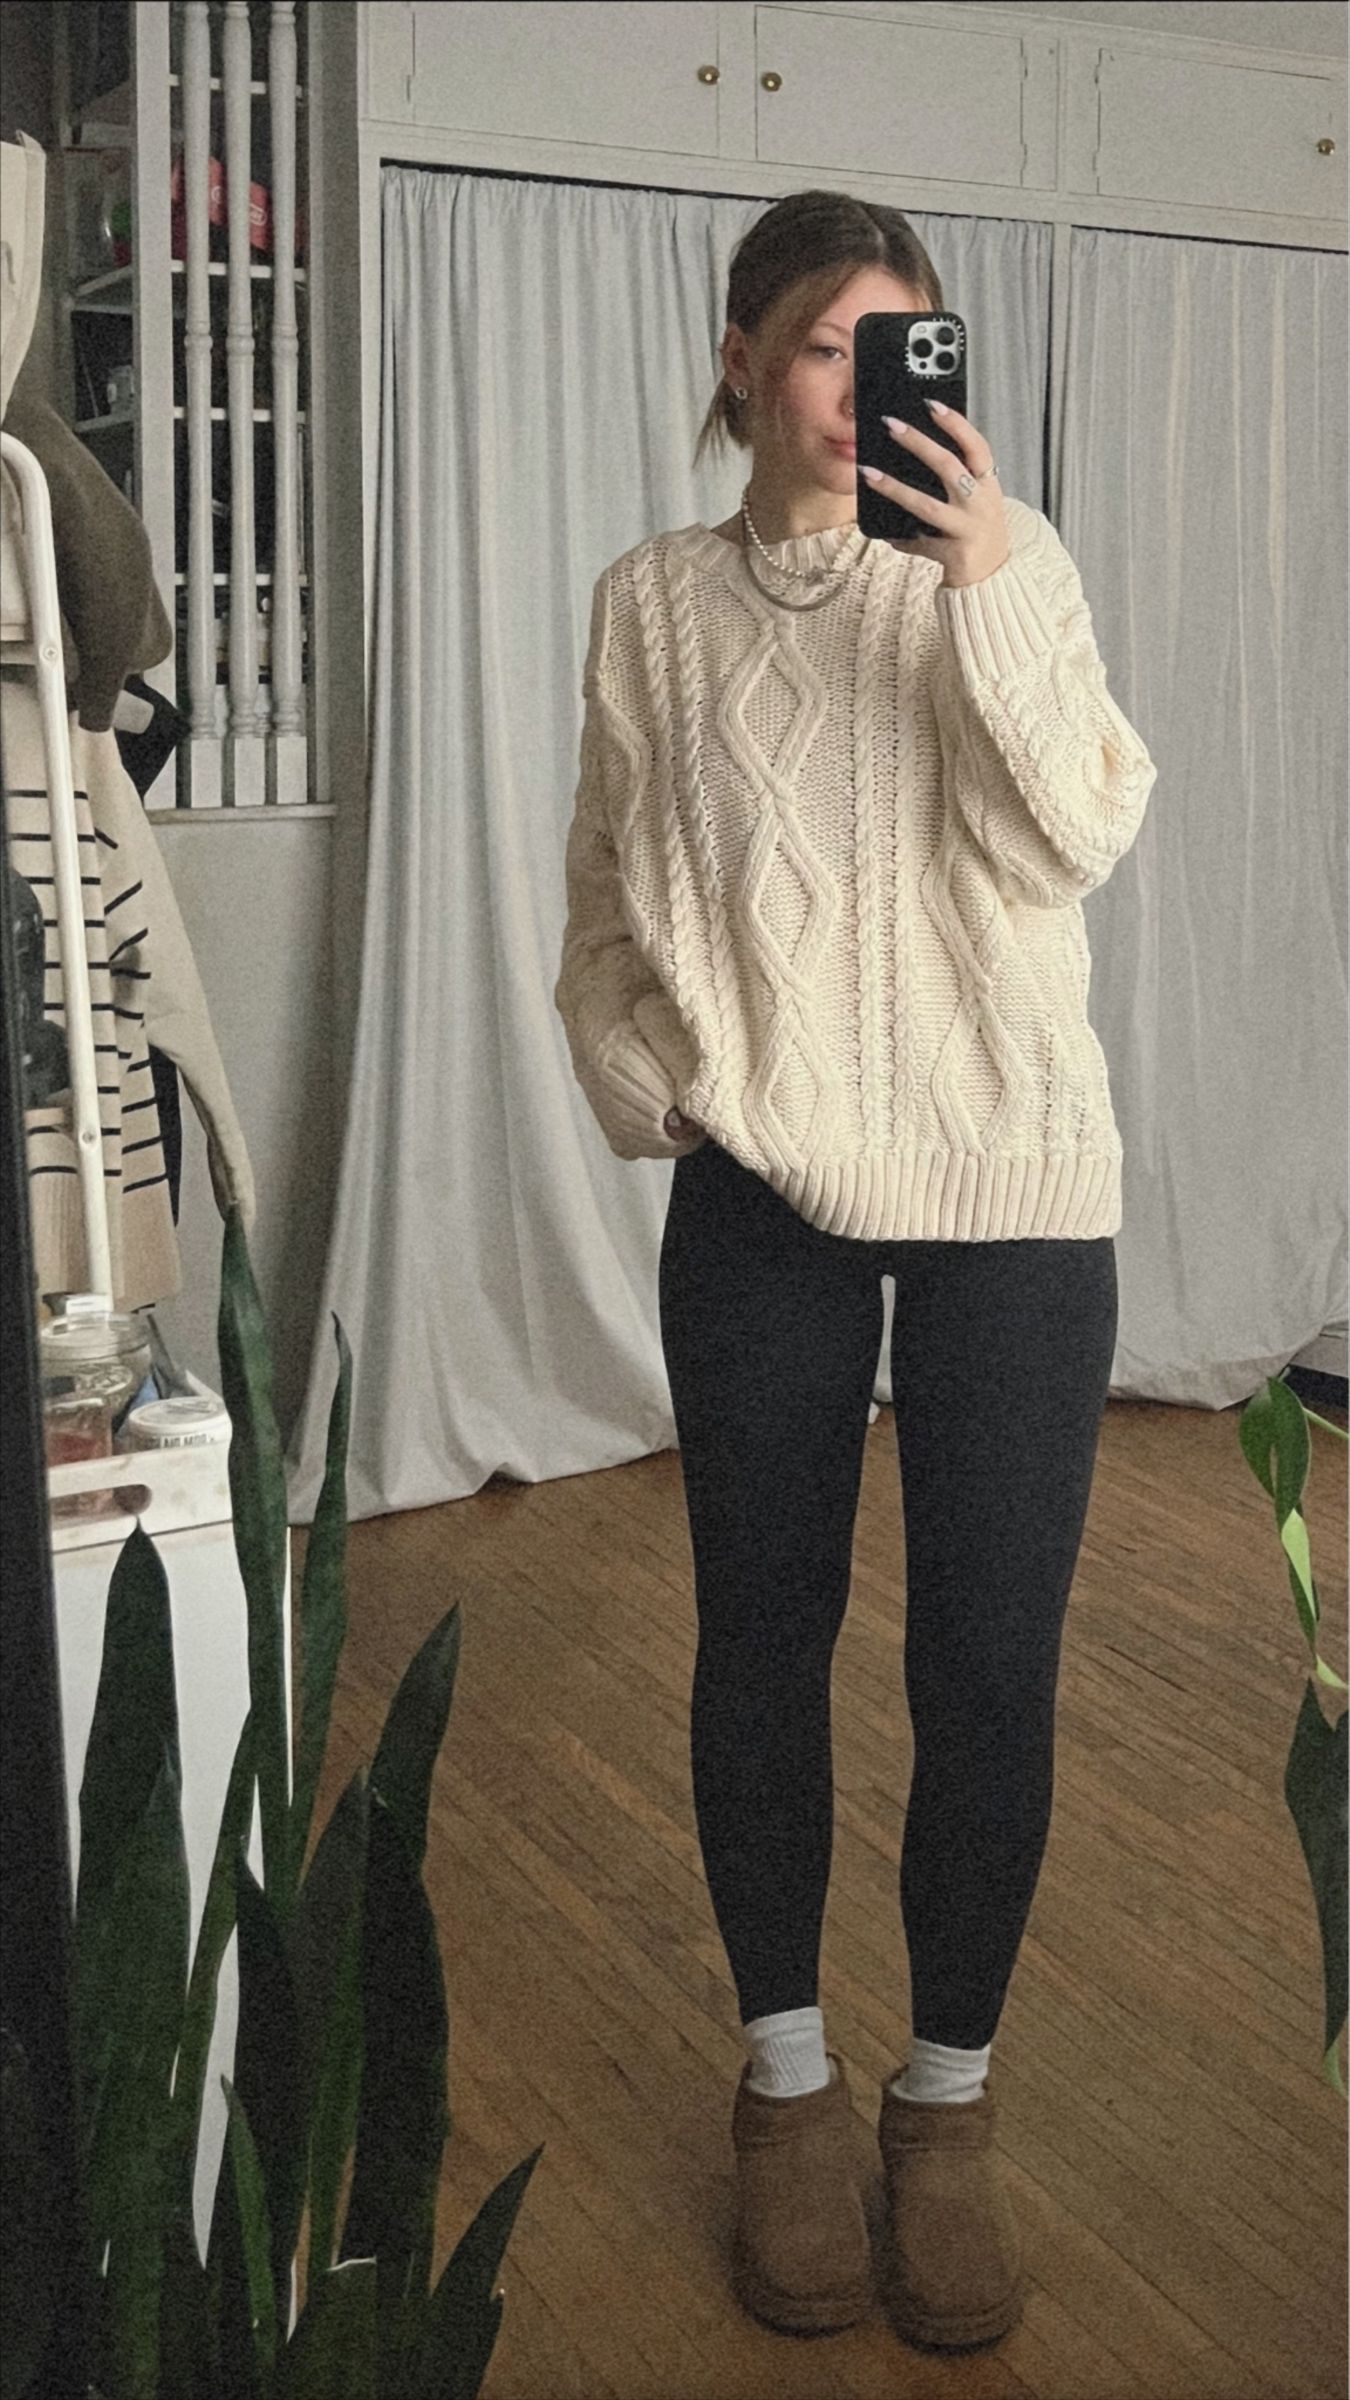 Cozy and Stylish: How to Wear Sweater
Leggings This Season